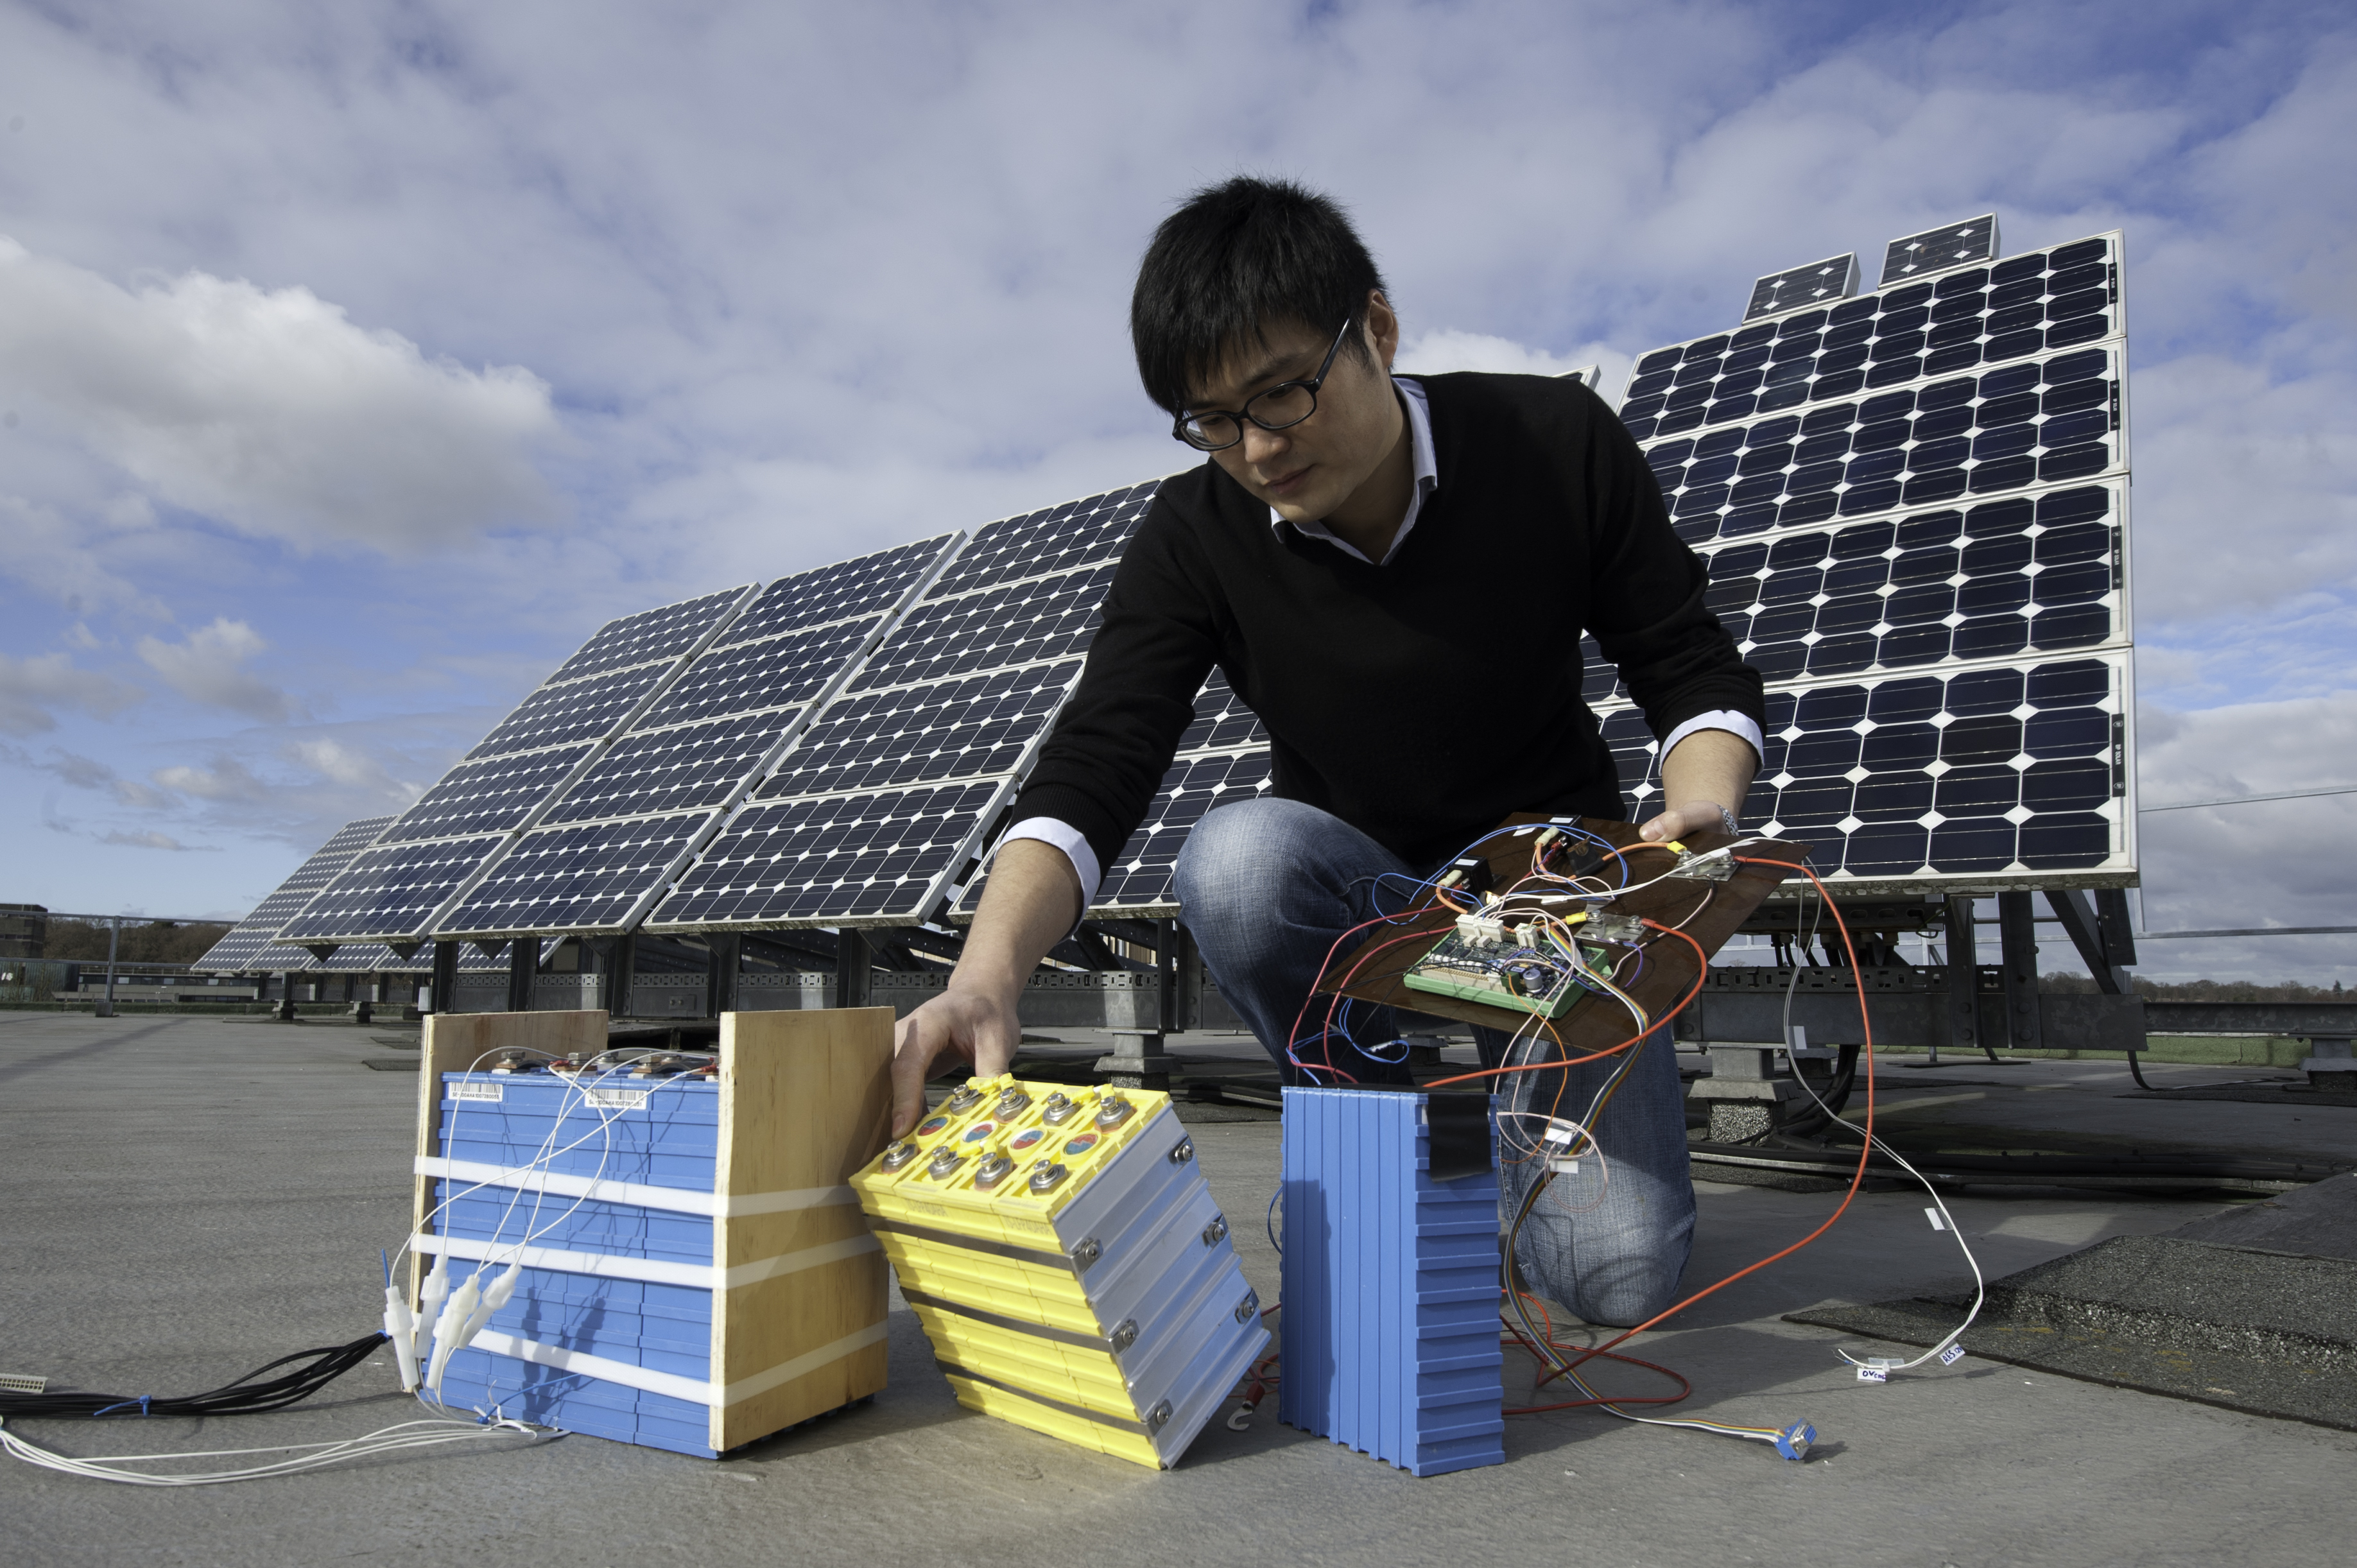 MSc project: Testing a new type of battery (LiFePO4) for the use in solar PV systems